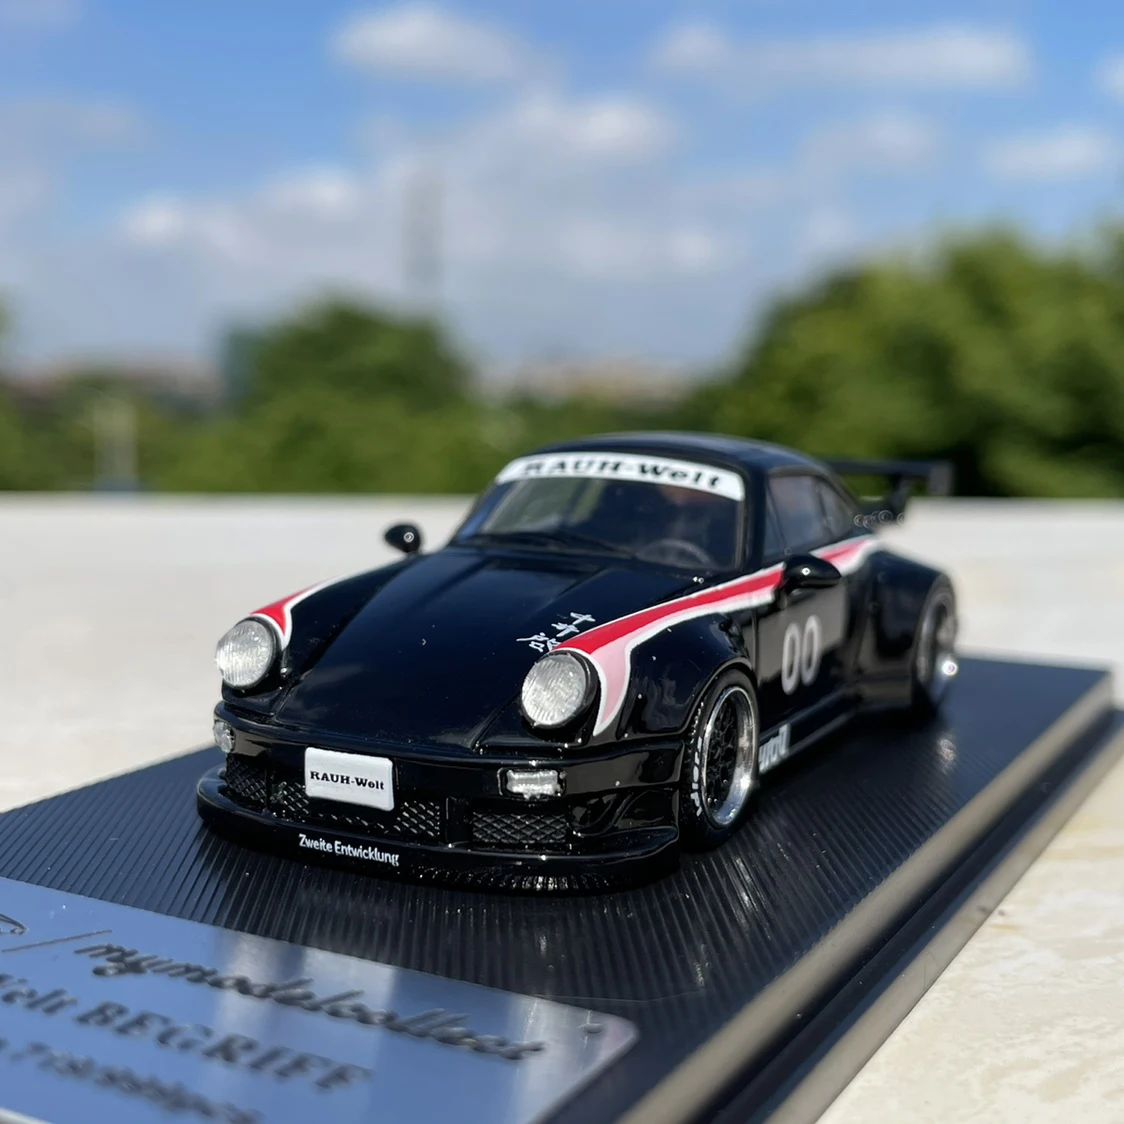 

1:64 Scale Diecast Alloy 911 Modified Supercar Cars Model Classics Nostalgia Adult Collection Toys Souvenir Gifts Static Display